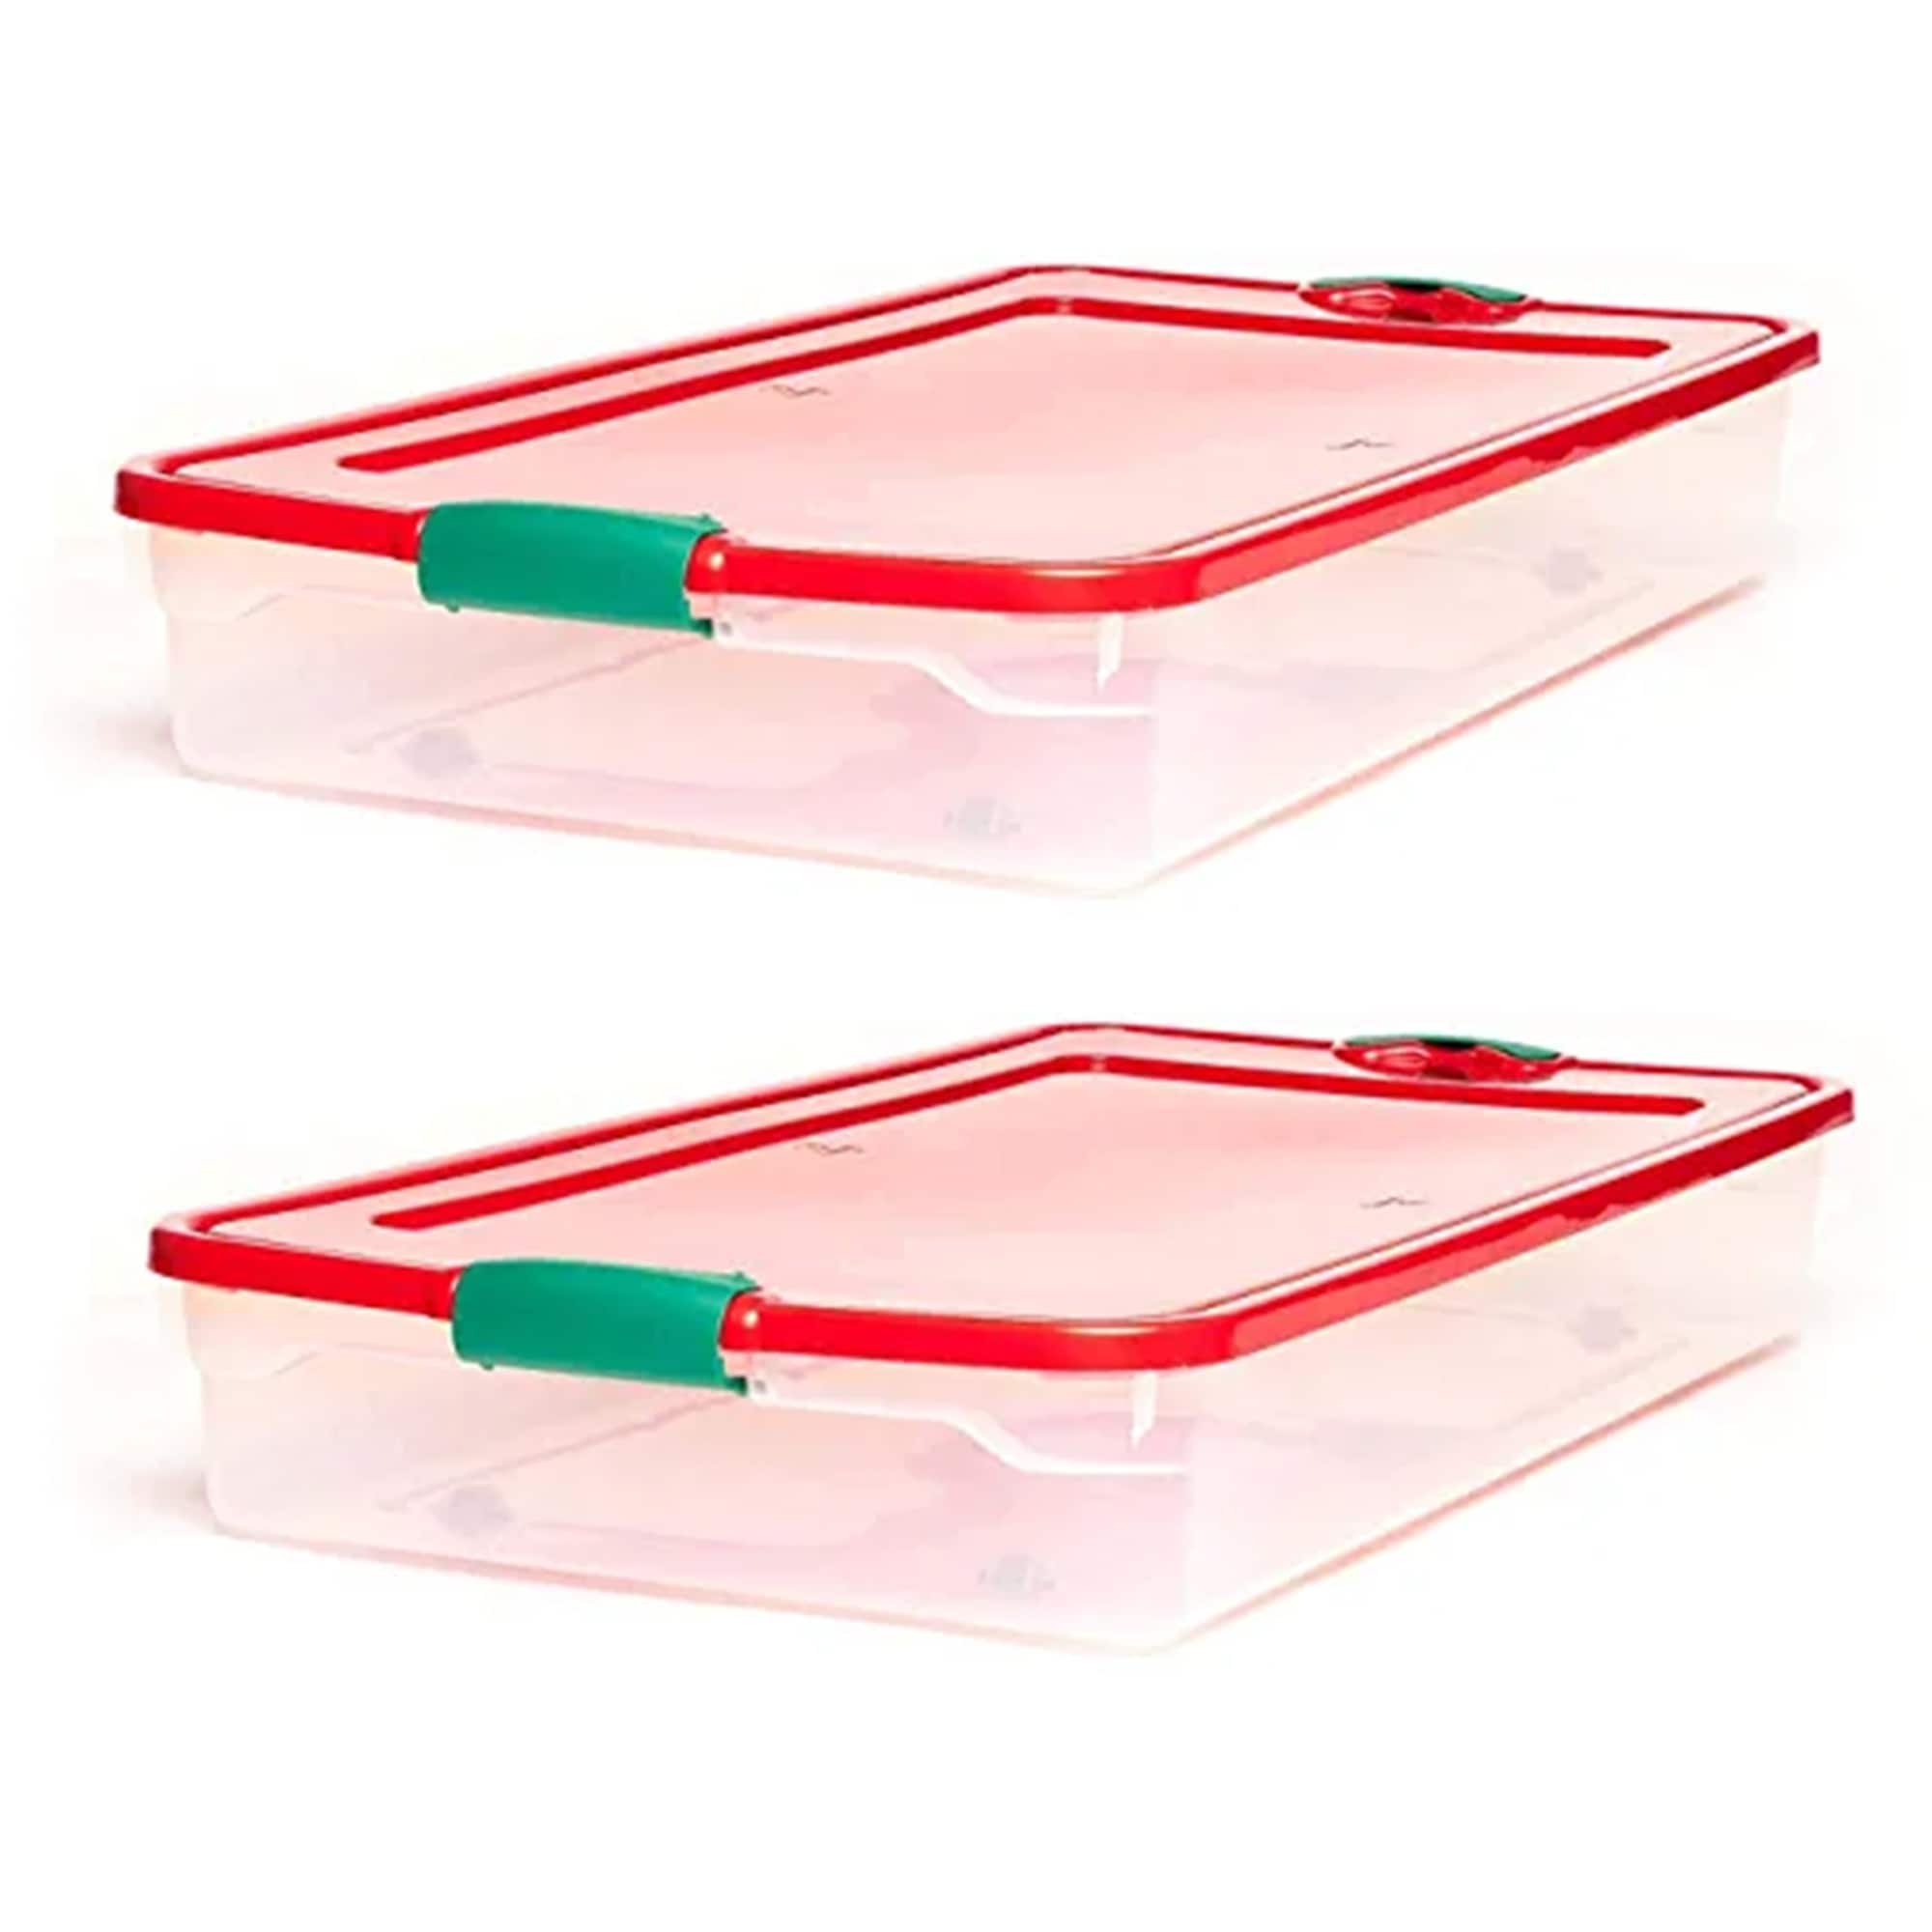 https://ak1.ostkcdn.com/images/products/is/images/direct/965d9364ef204d0de45dcfaeca832931e7160479/HOMZ-60-Quart-Latching-Holiday-Underbed-Storage-Container-Box%2C-Clear-%282-Pack%29.jpg